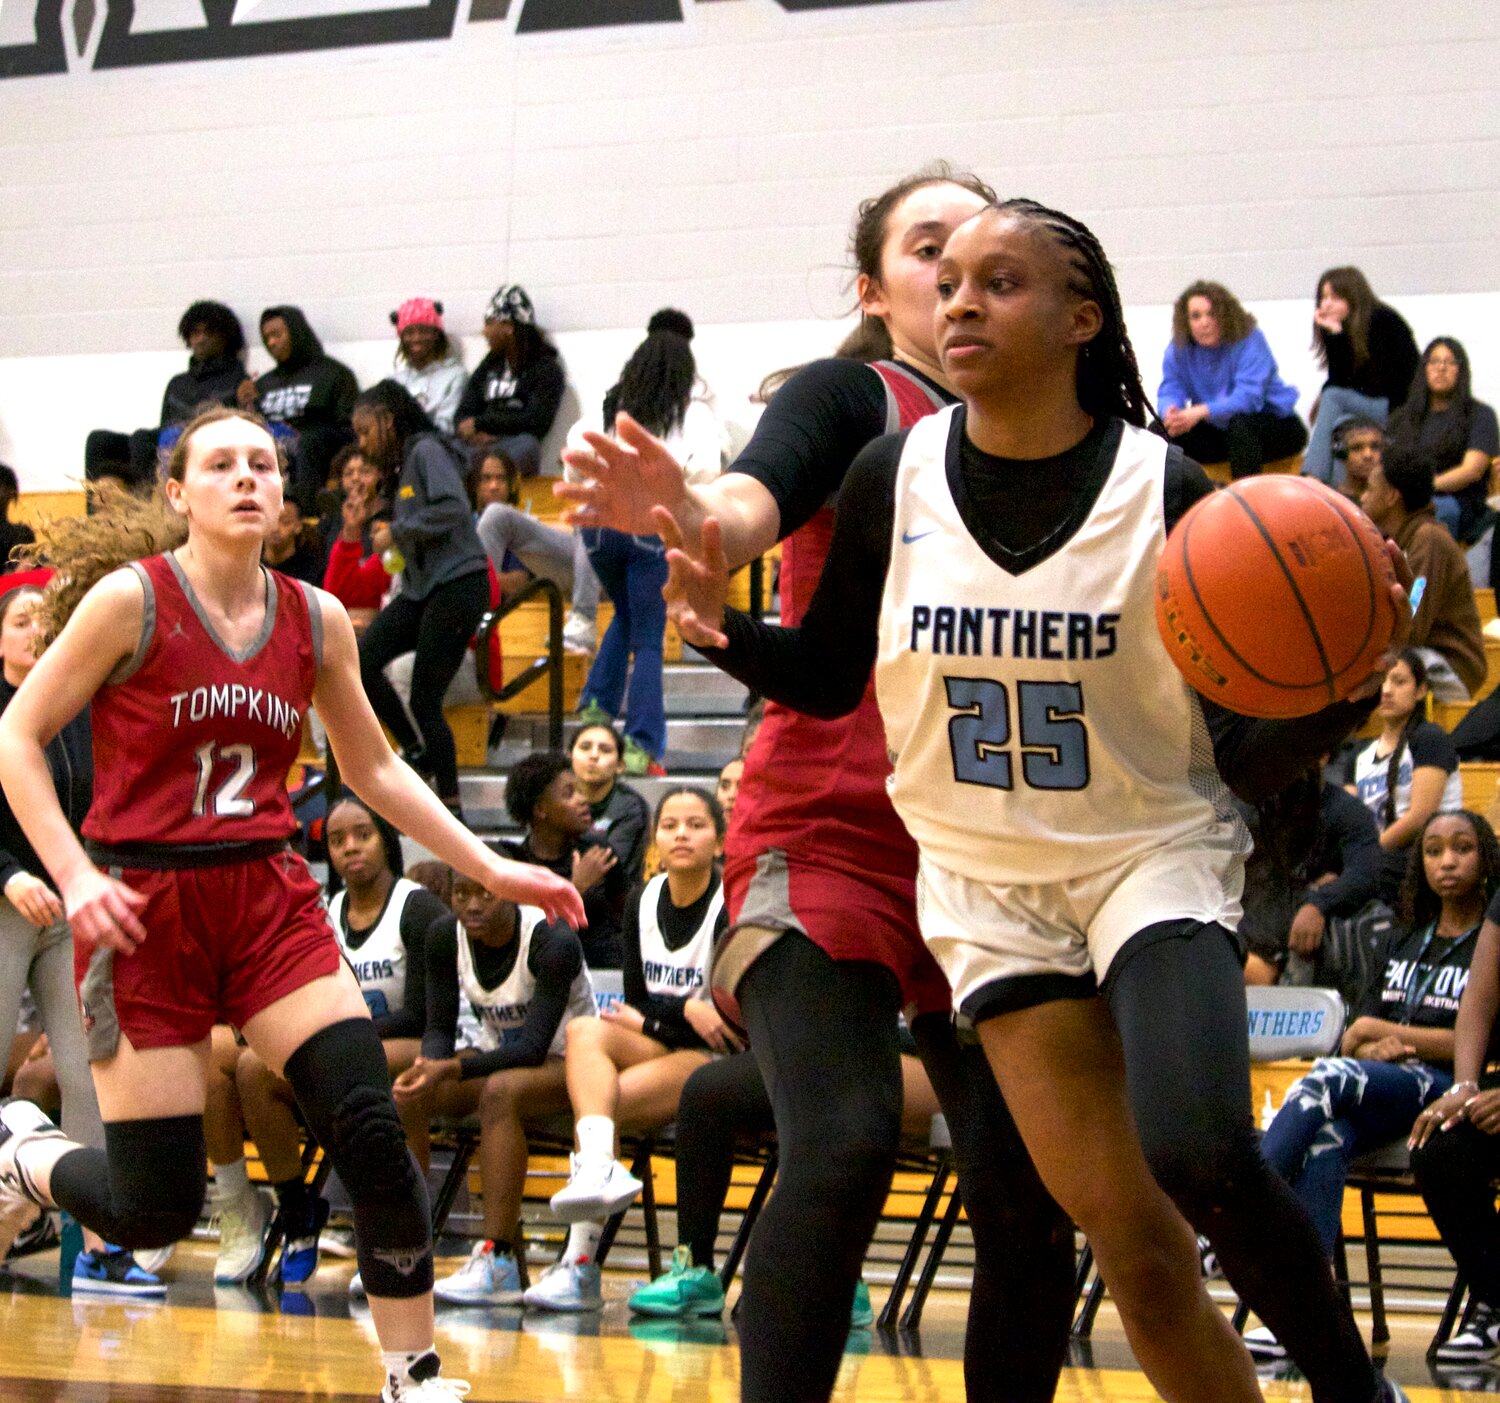 Tiera Hall drives to the basket during Tuesday’s game between Tompkins and Paetow at the Paetow gym.